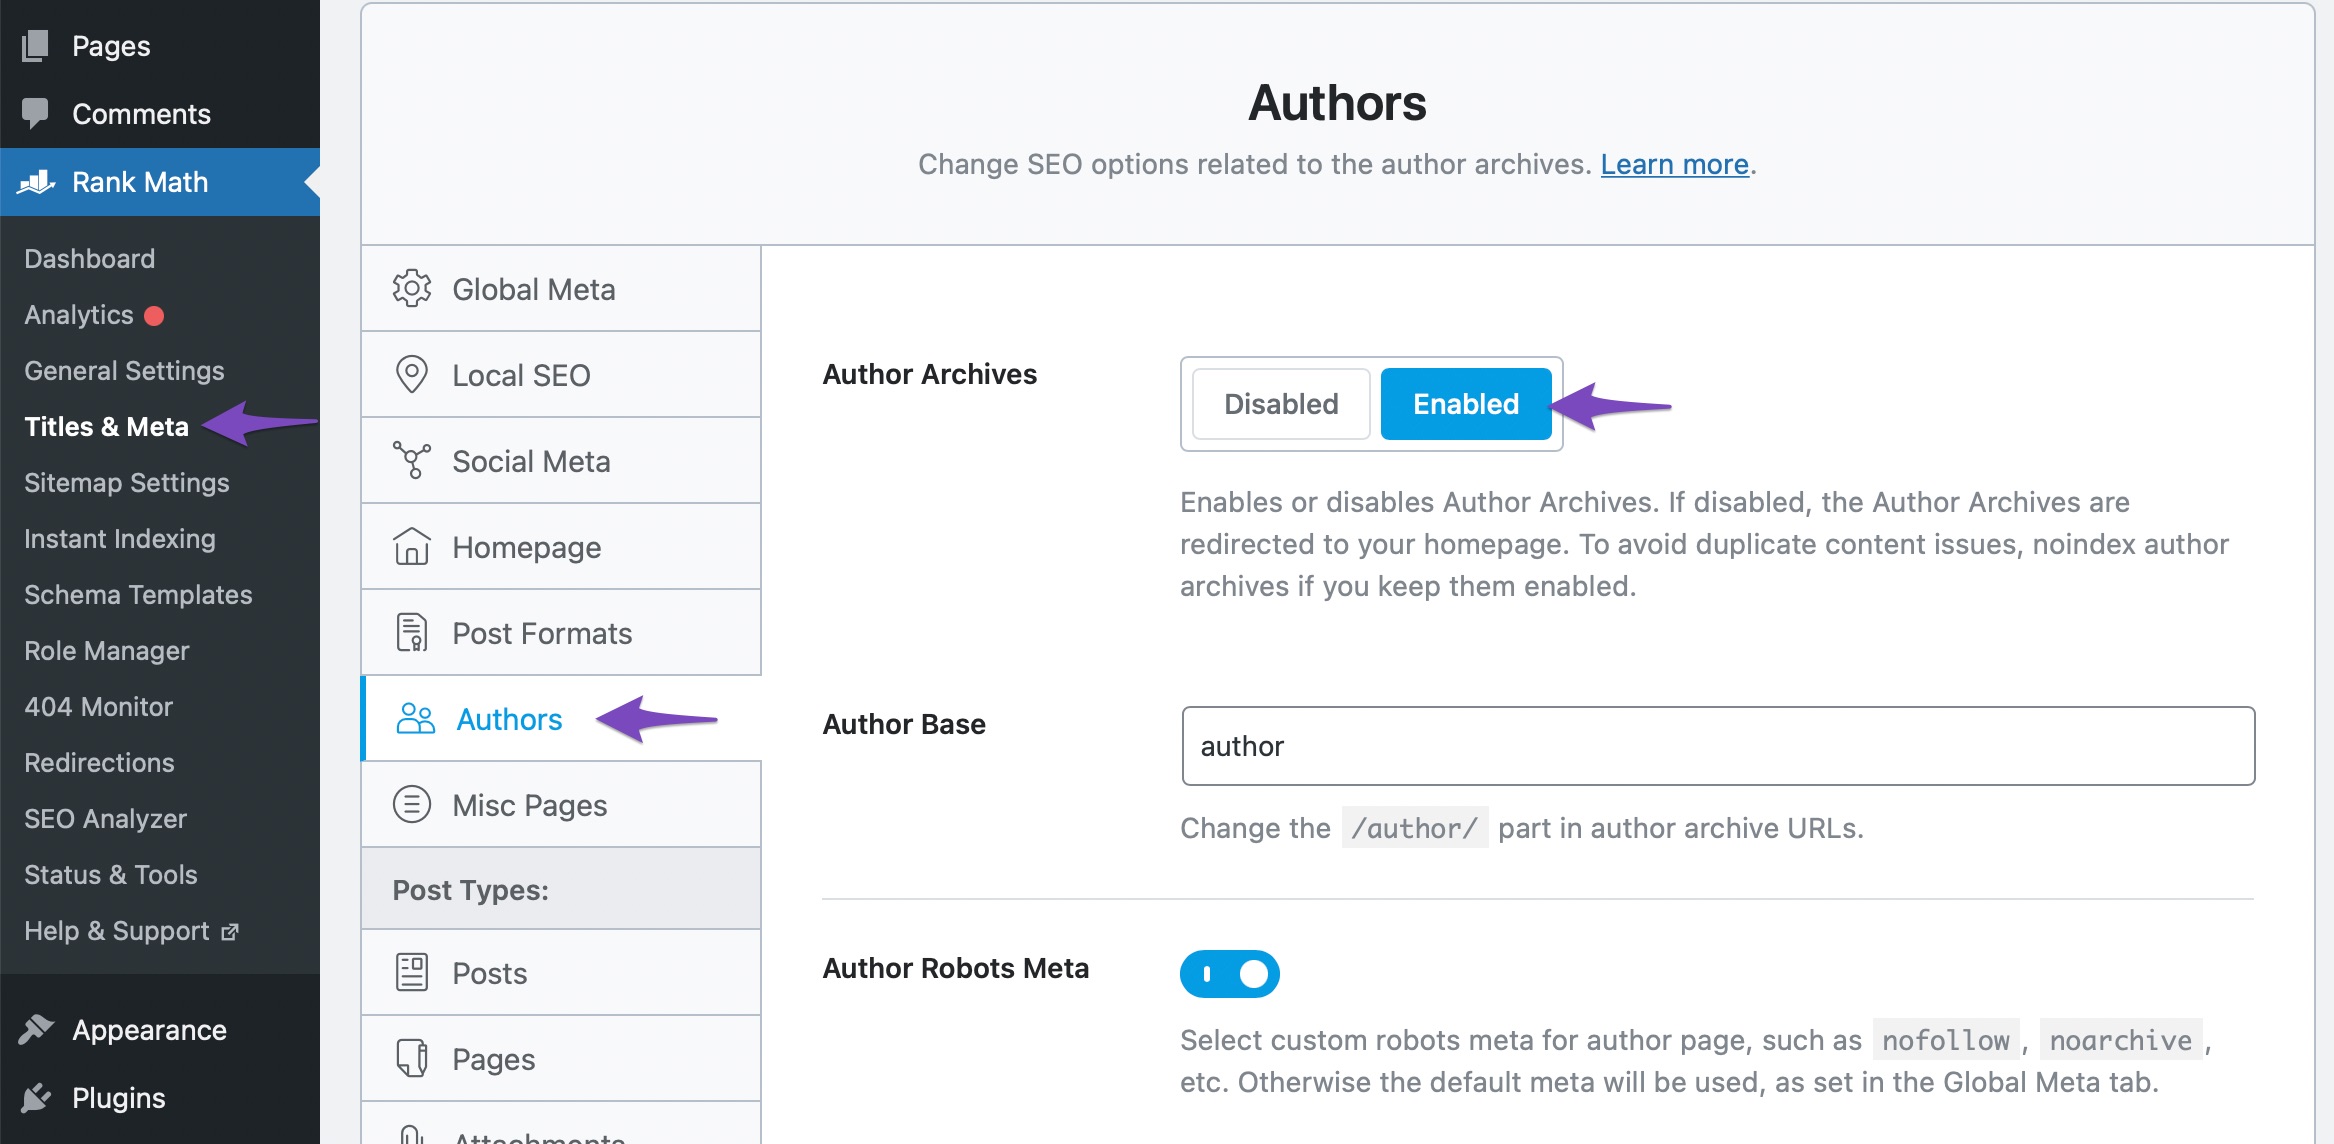 Enable Author archives in Rank Math Titles & Meta